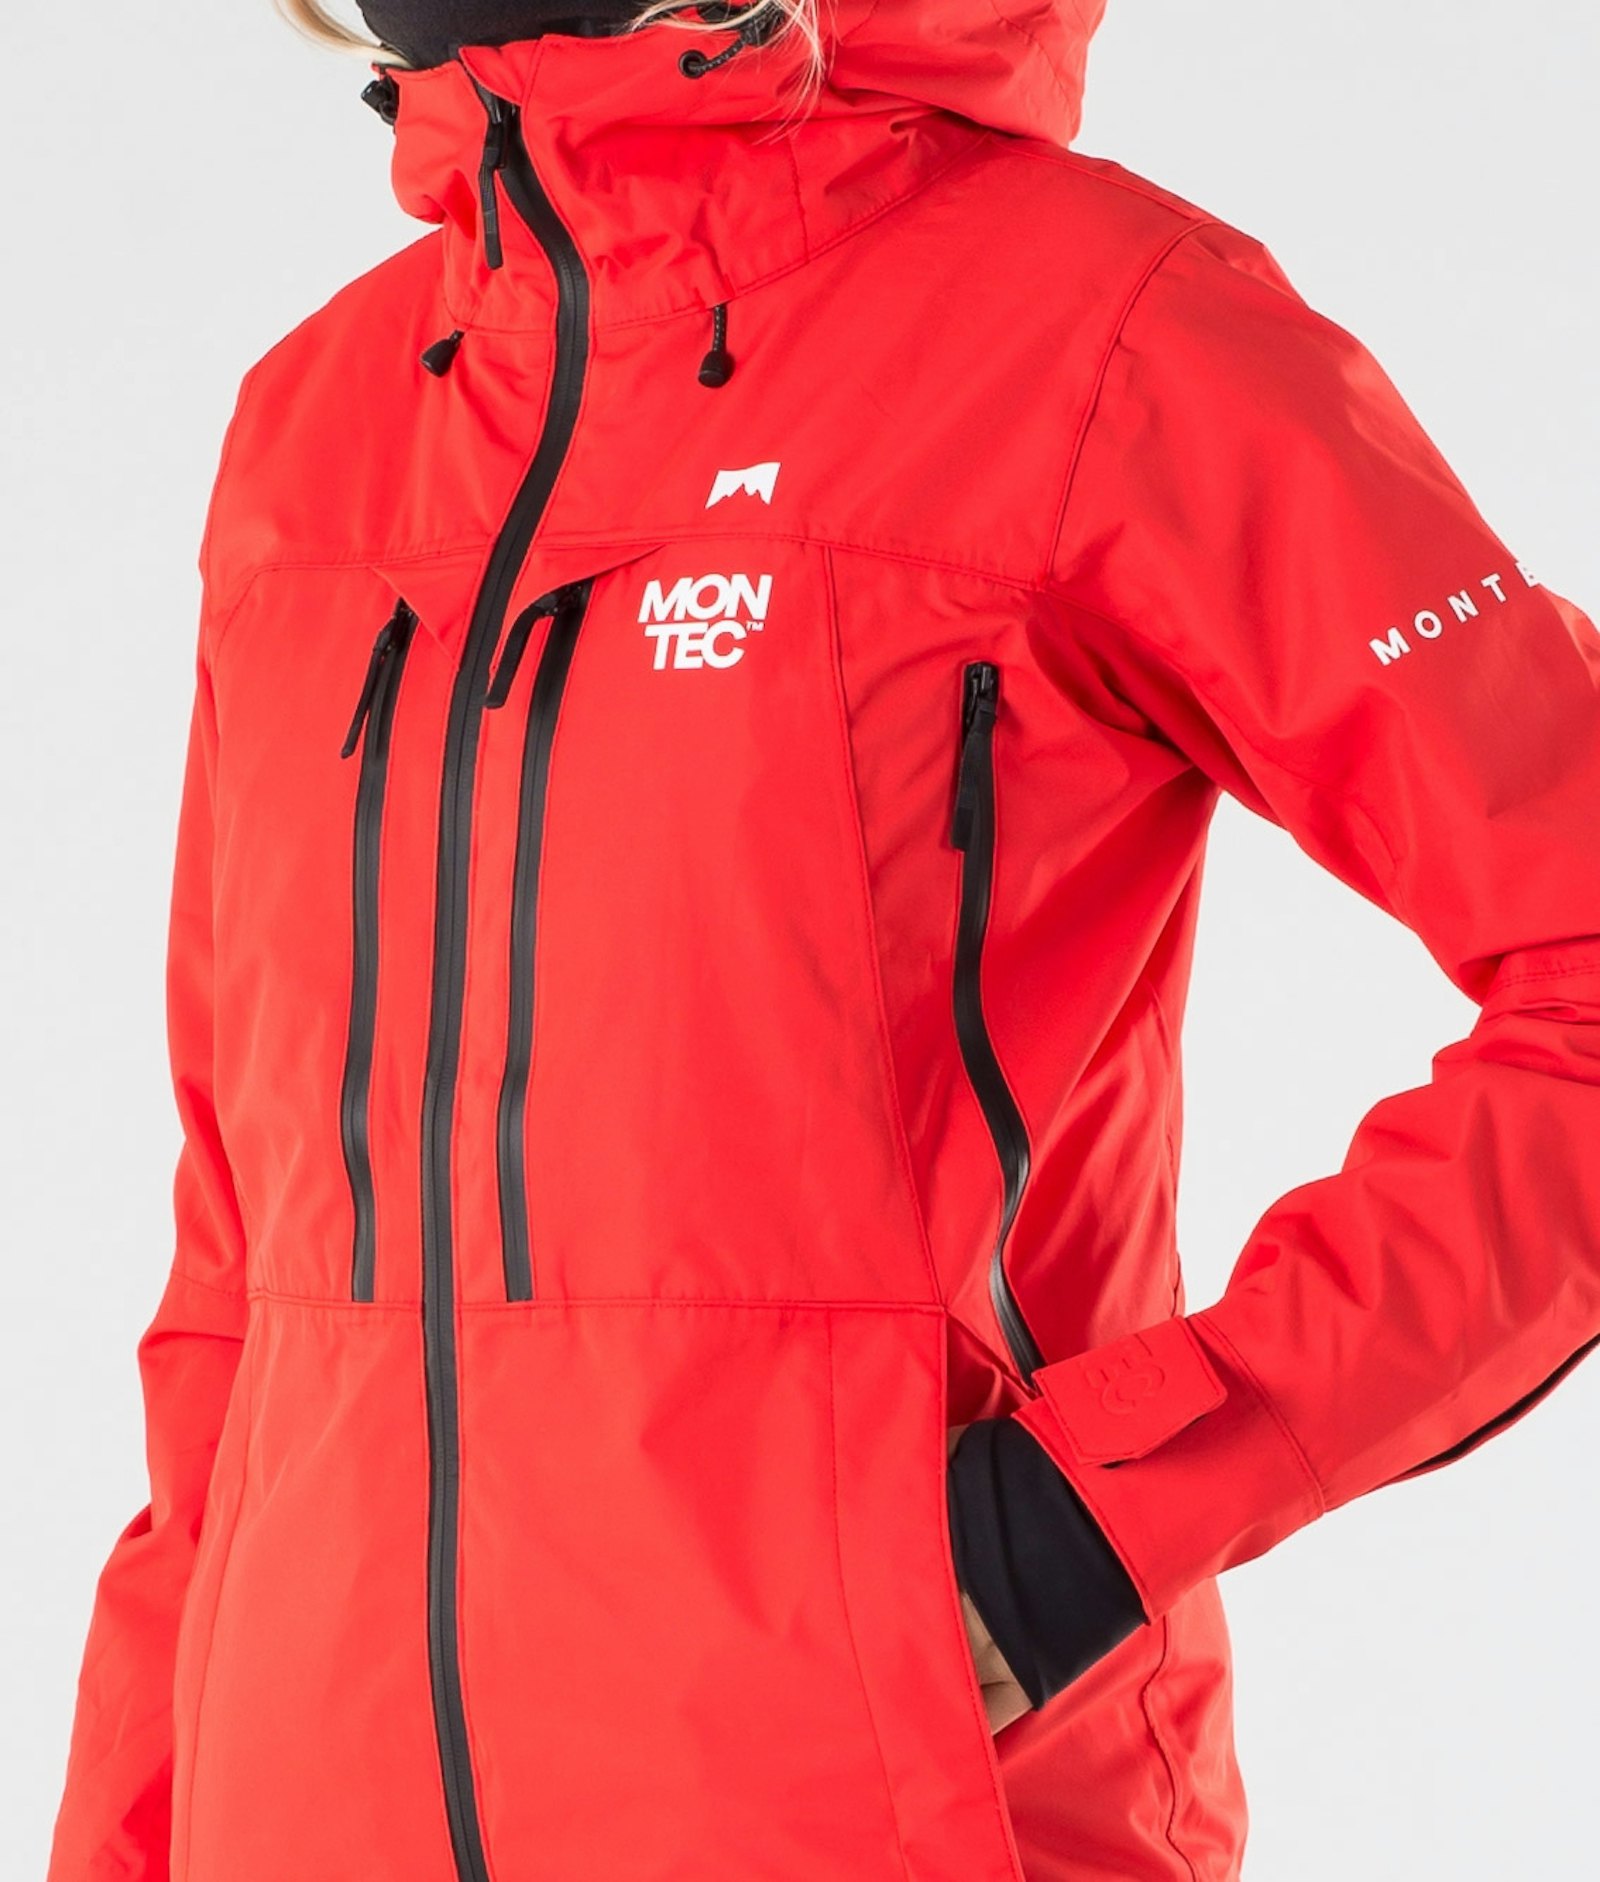 Moss W 2019 Chaqueta Esquí Mujer Red